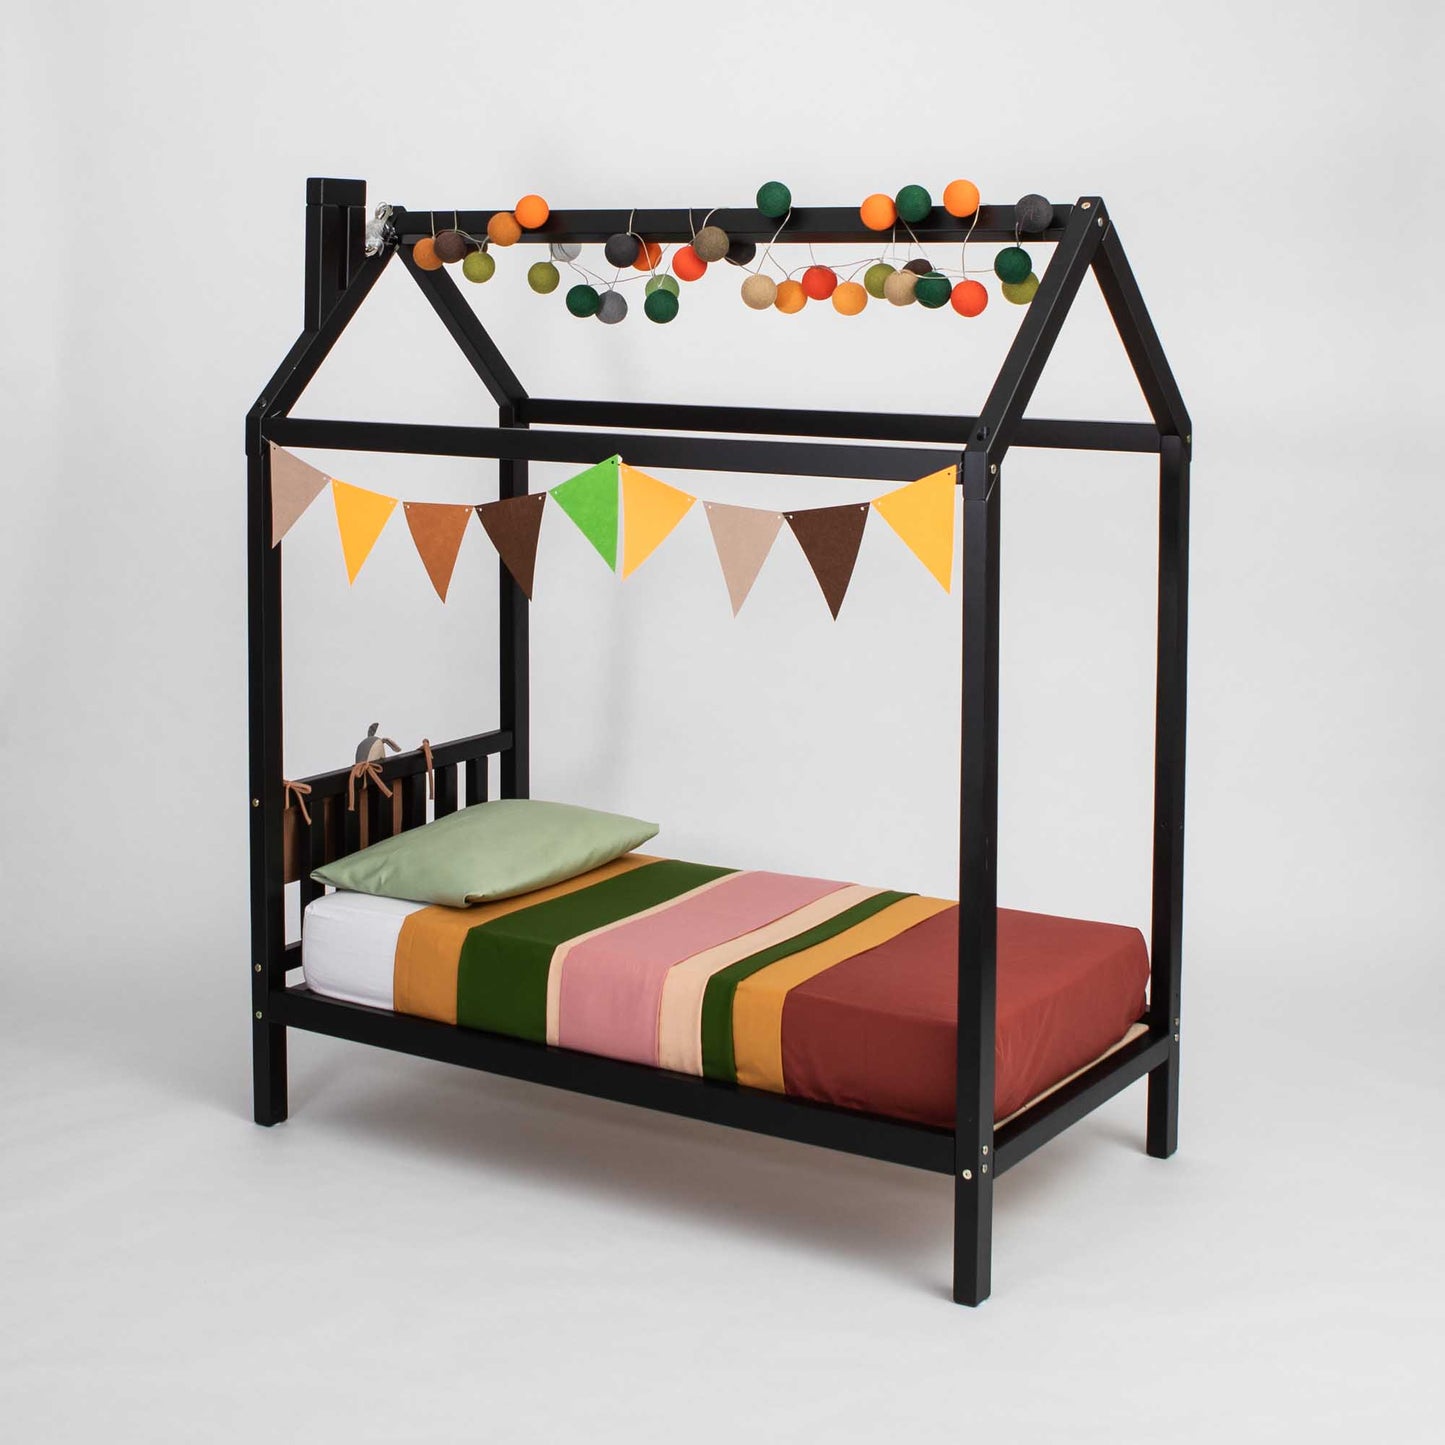 A Toddlers' house bed on legs with a headboard with a bunting hanging from it.